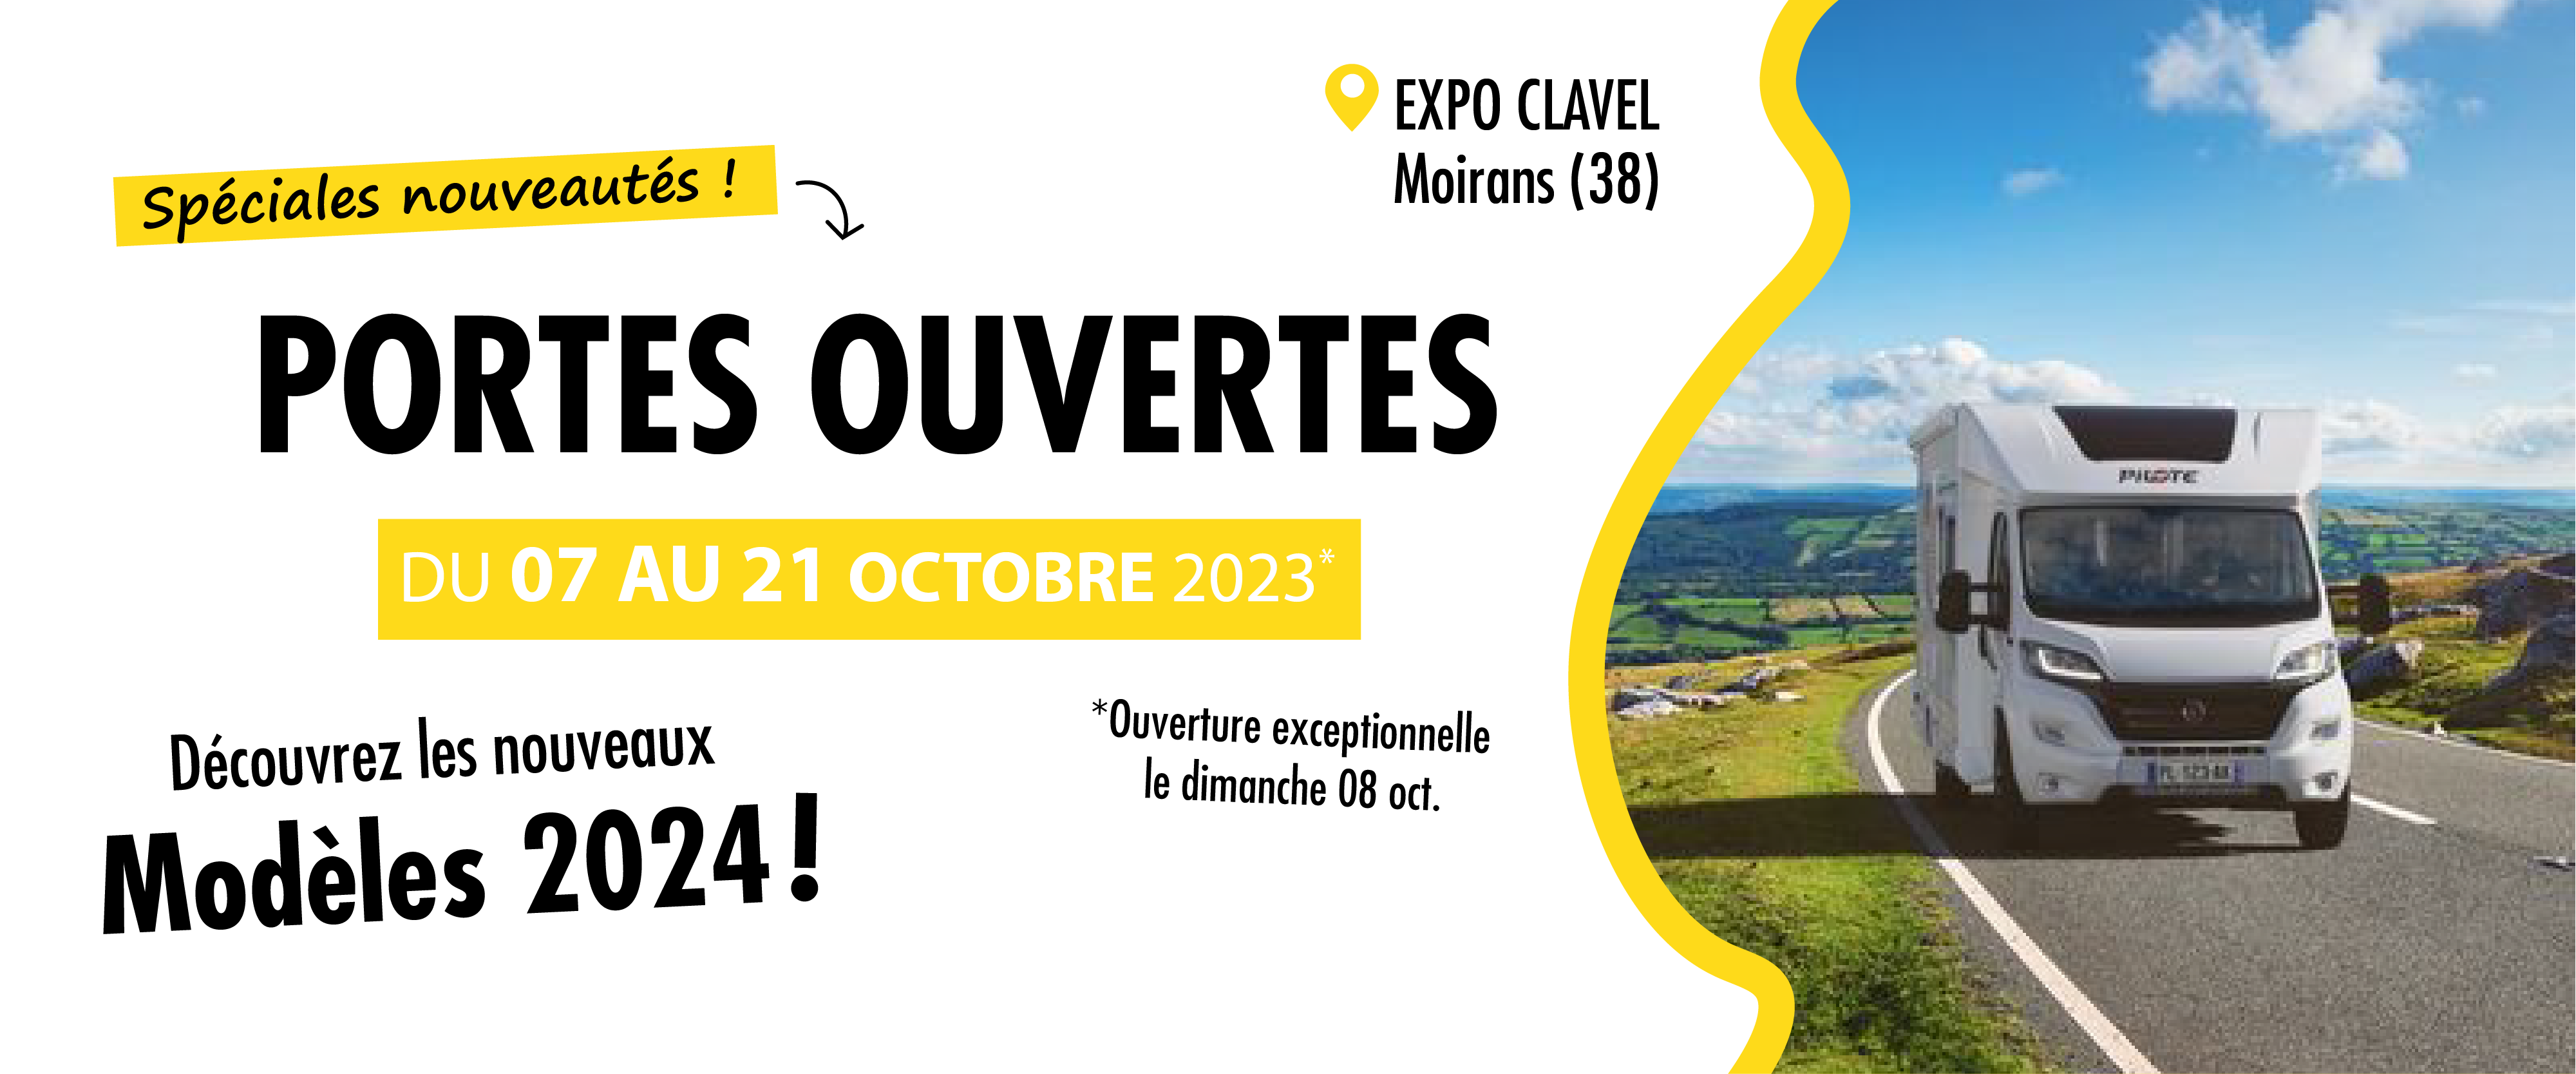 EXPO-VENTE CAMPING-CARS ST-LÔ